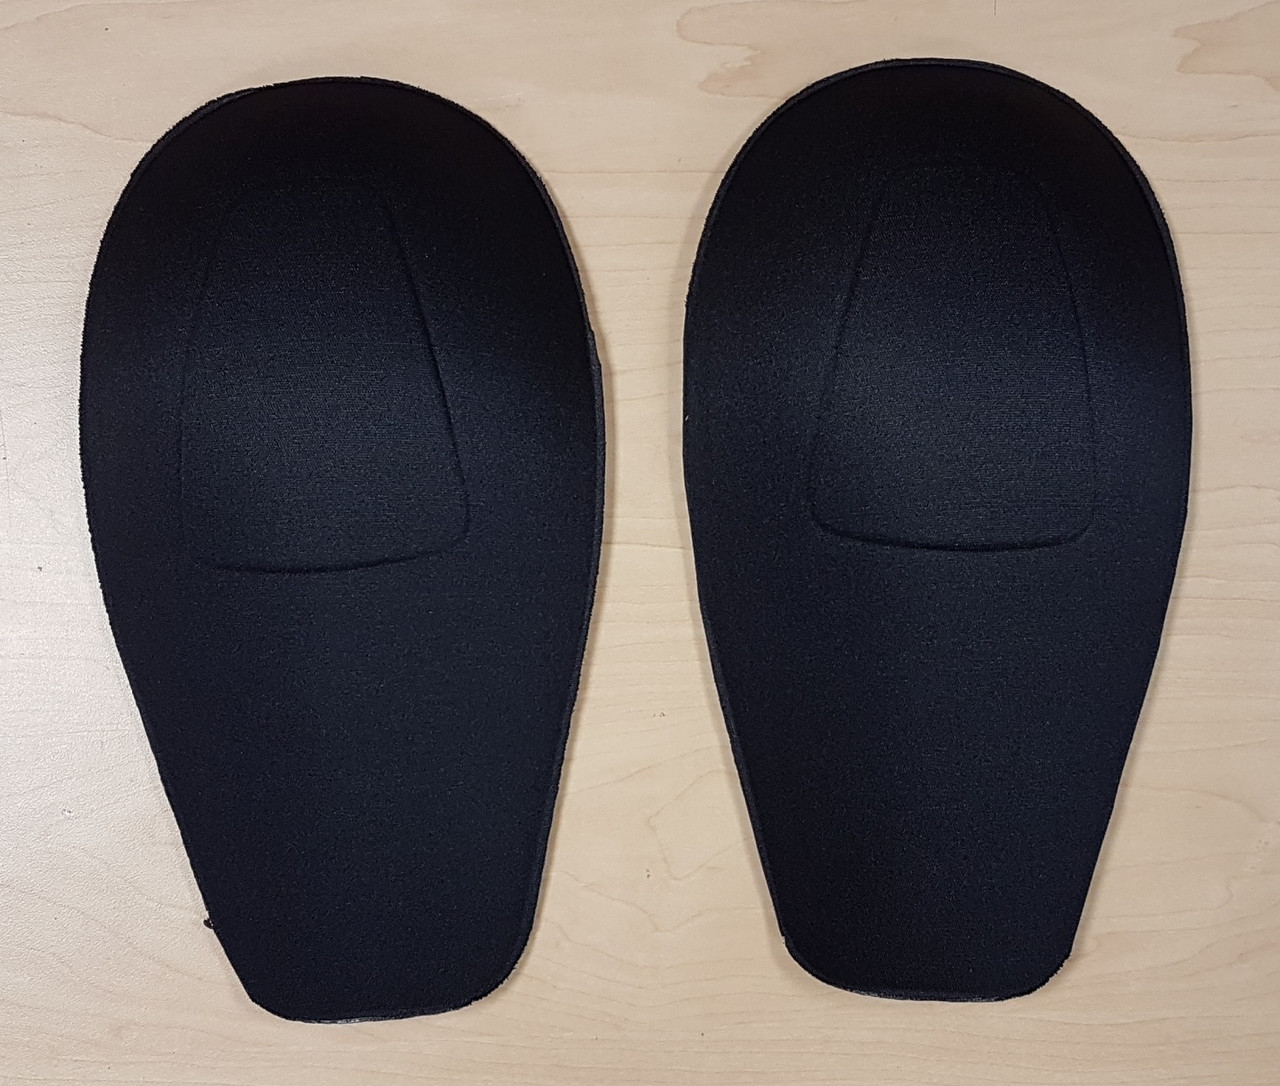 CANADIAN FORCES ISSUED KNEE PAD INSERTS